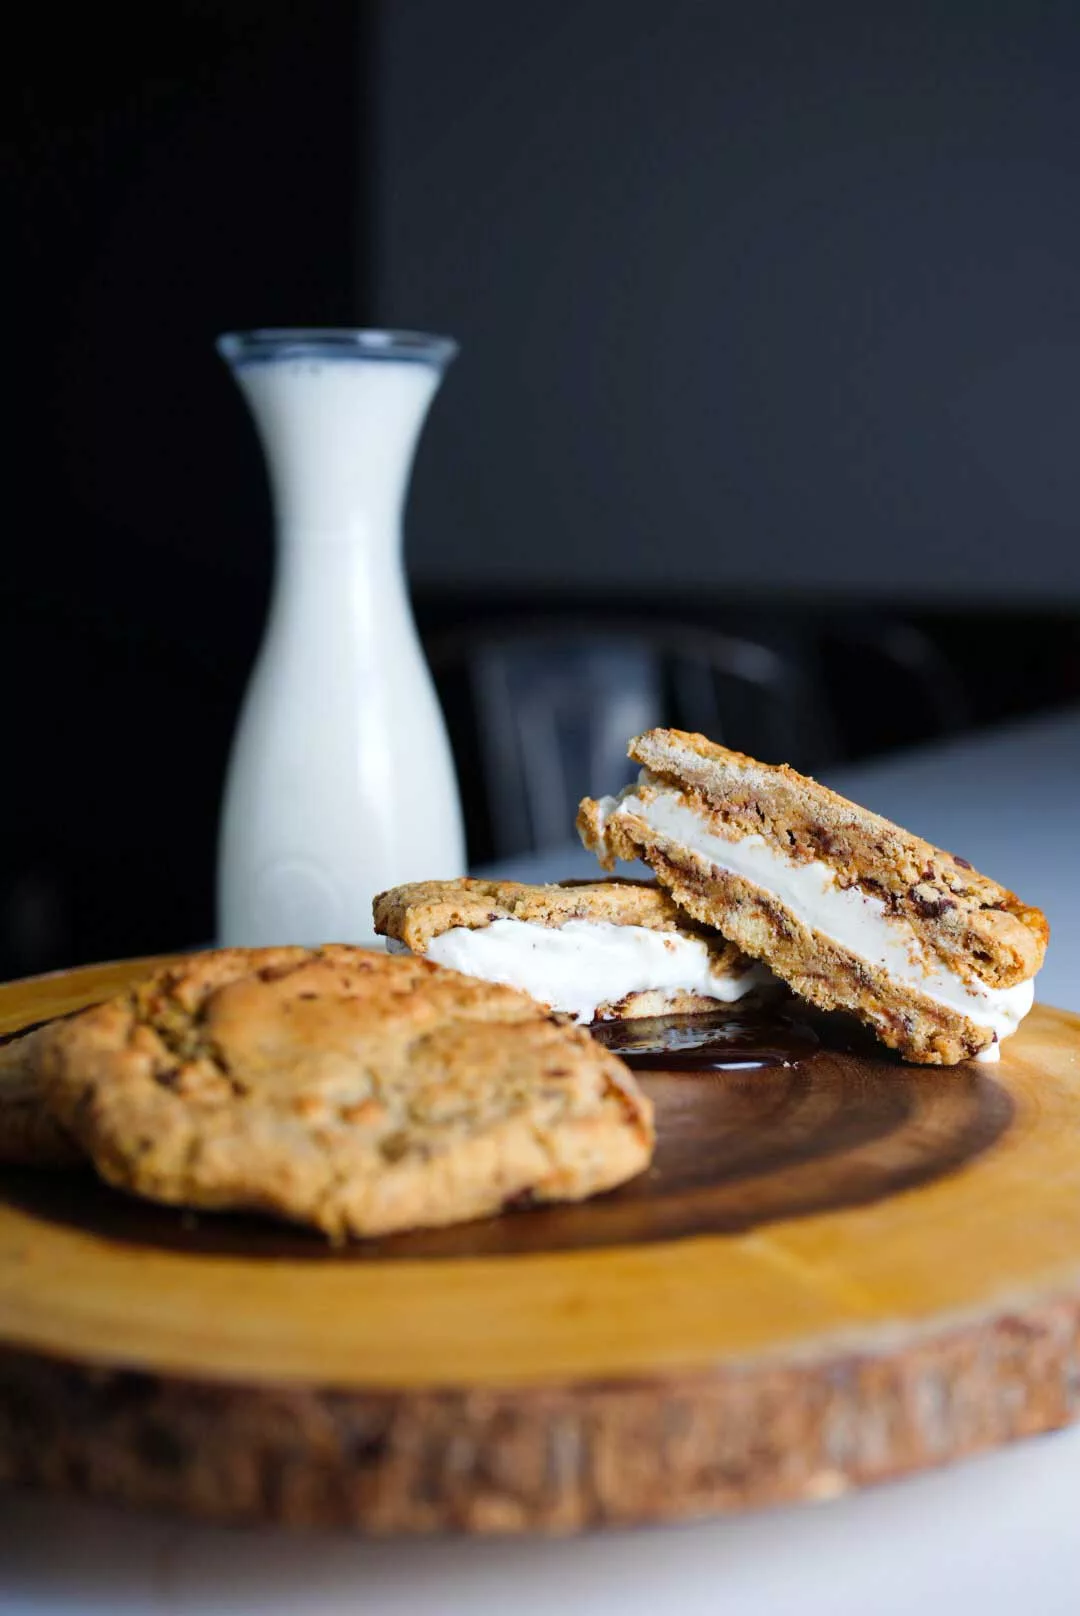 Cookie sandwiches with a pitcher of milk in the background